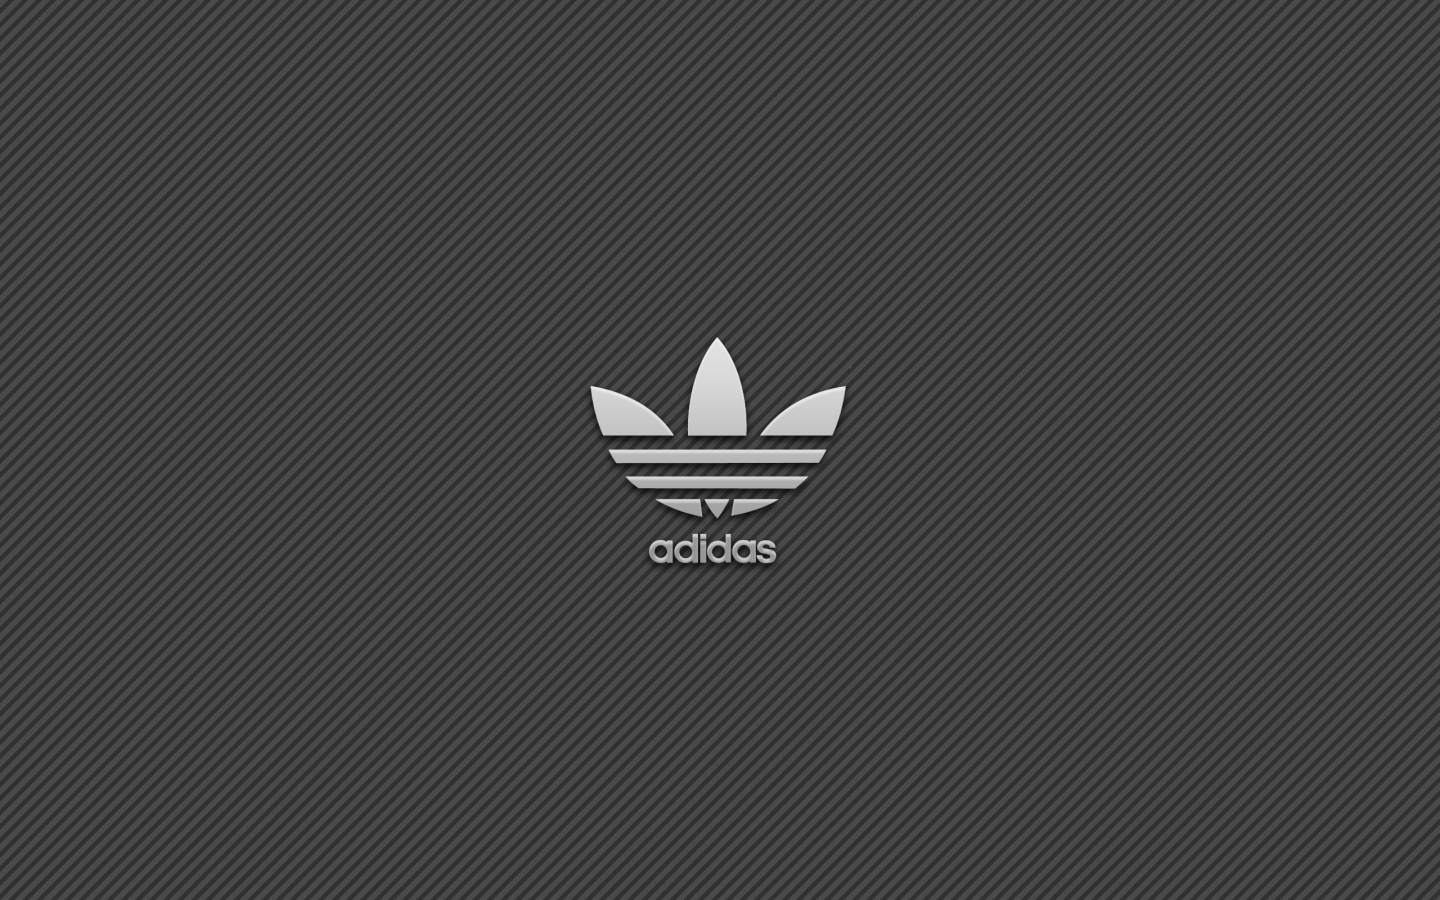 Adidas Simple Logo Background for 1440 x 900 widescreen resolution